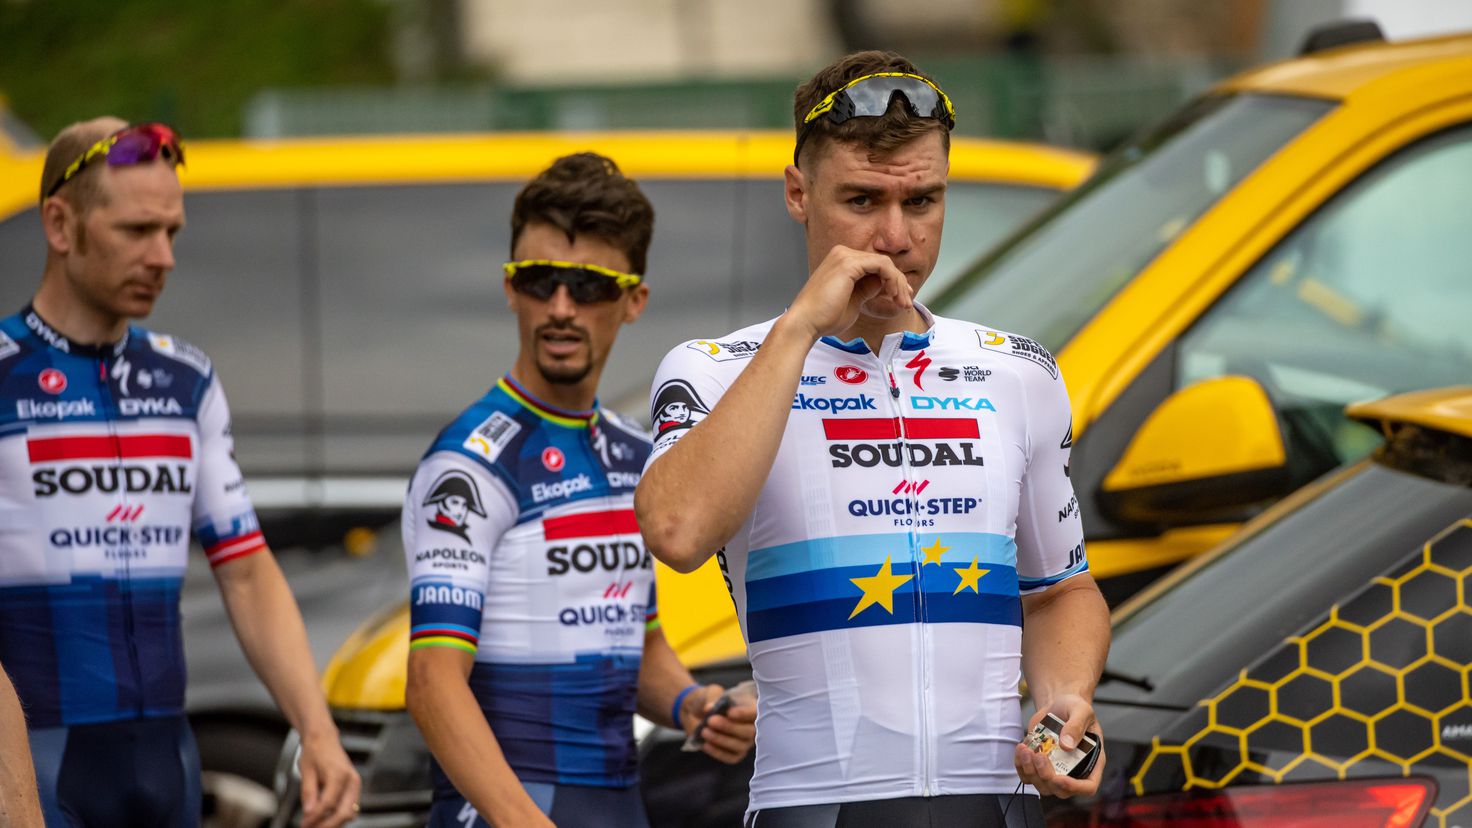 Fabio Jakobsen will leave Soudal Quick Step at the end of the season
